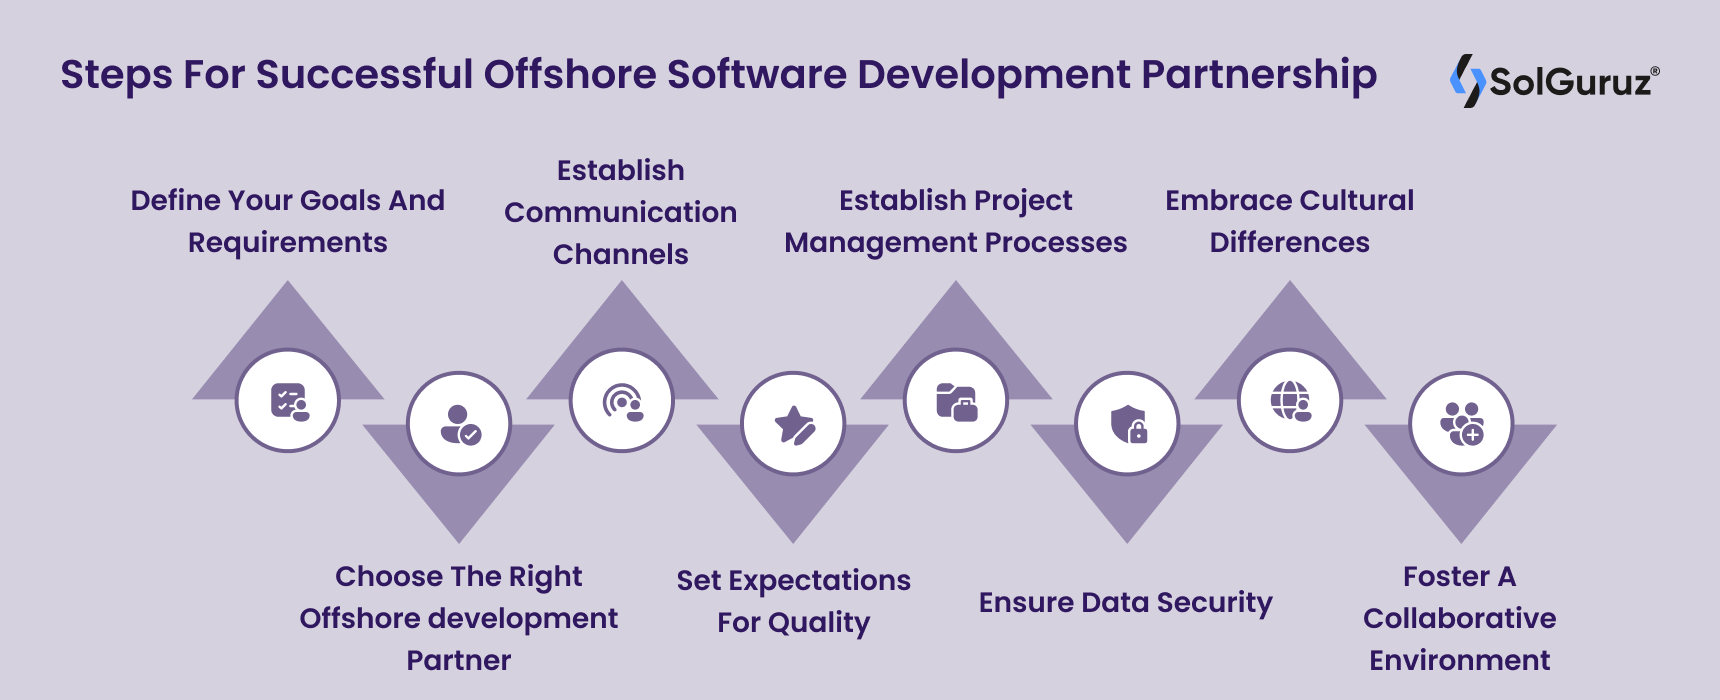 Steps For Successful Offshore Software Development Partnership